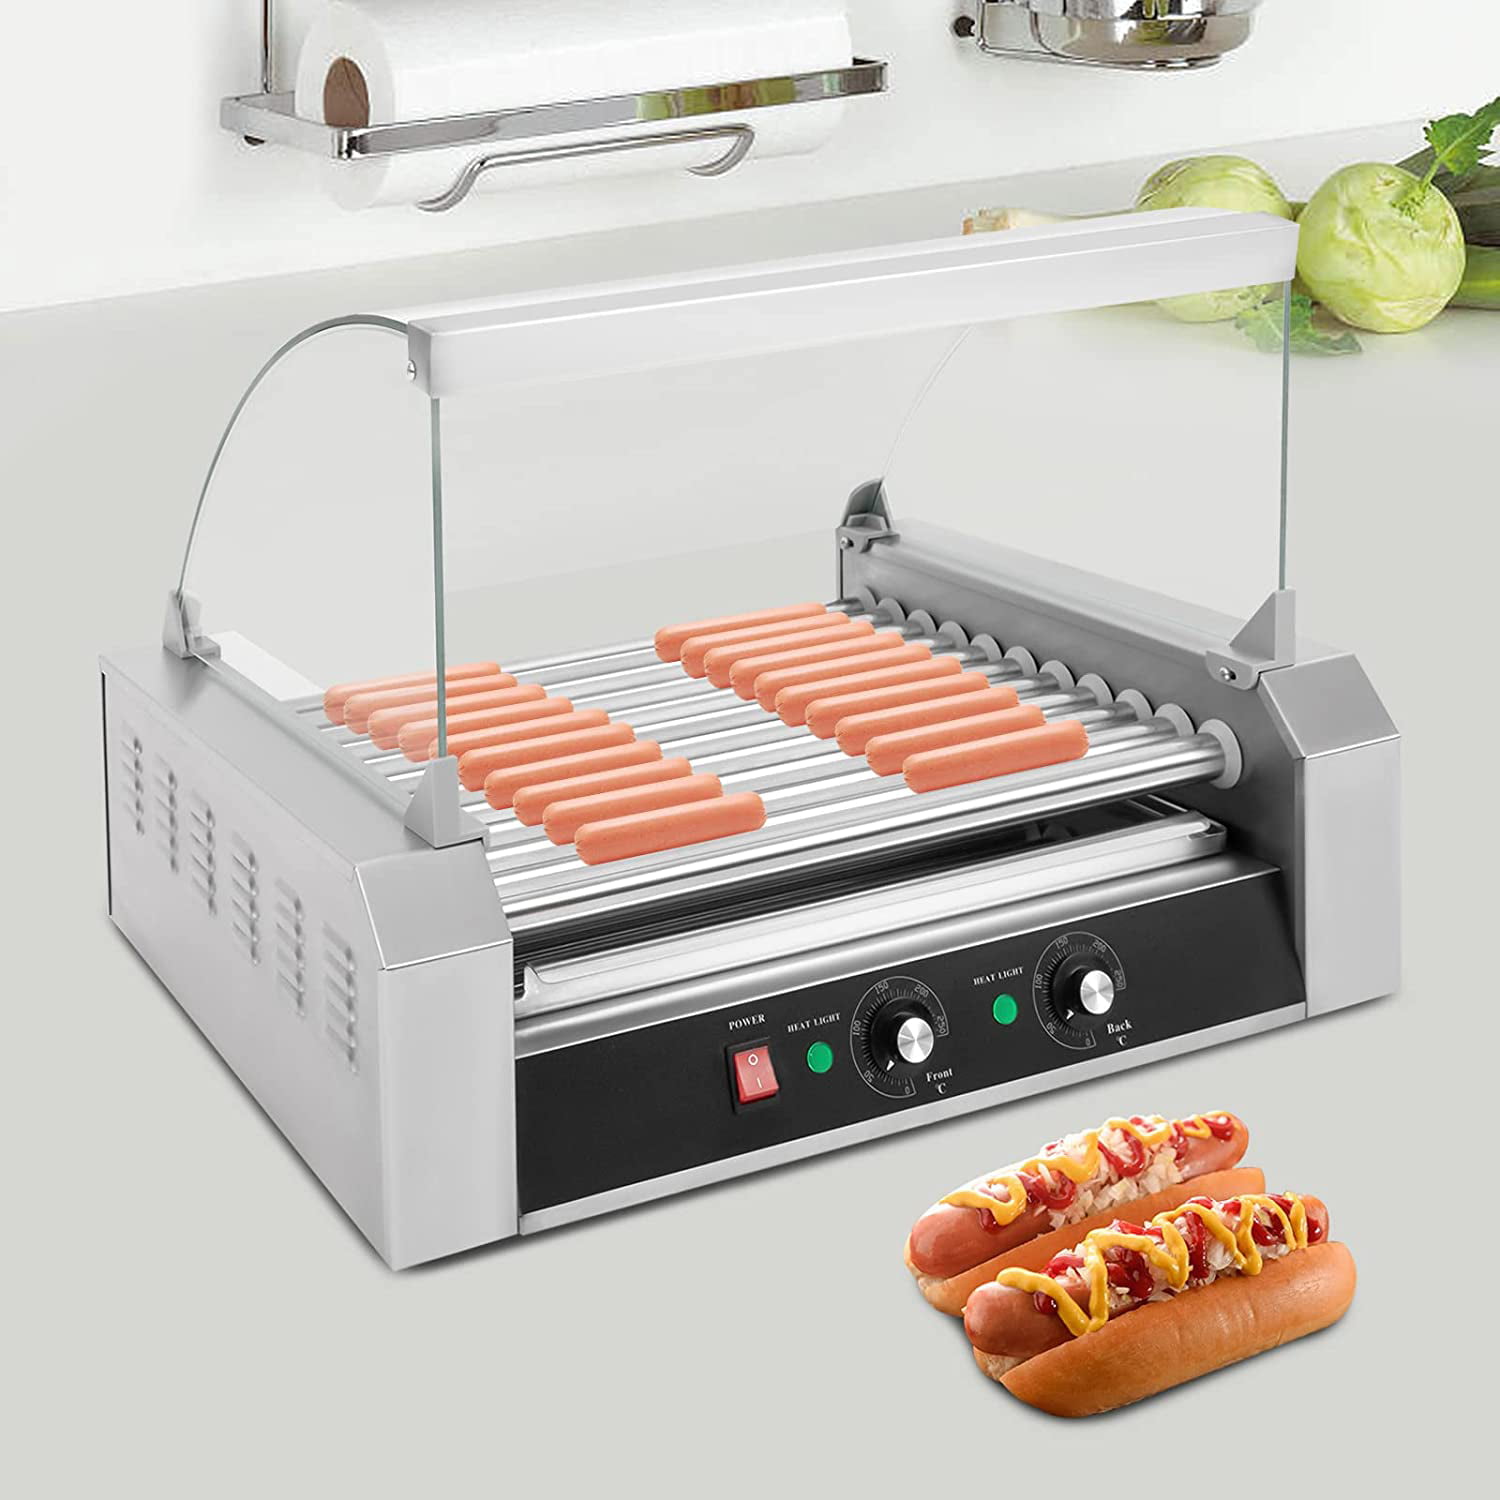 PartyHut Commercial 30 Hot Dog 11 Roller Grill Cooker Warmer